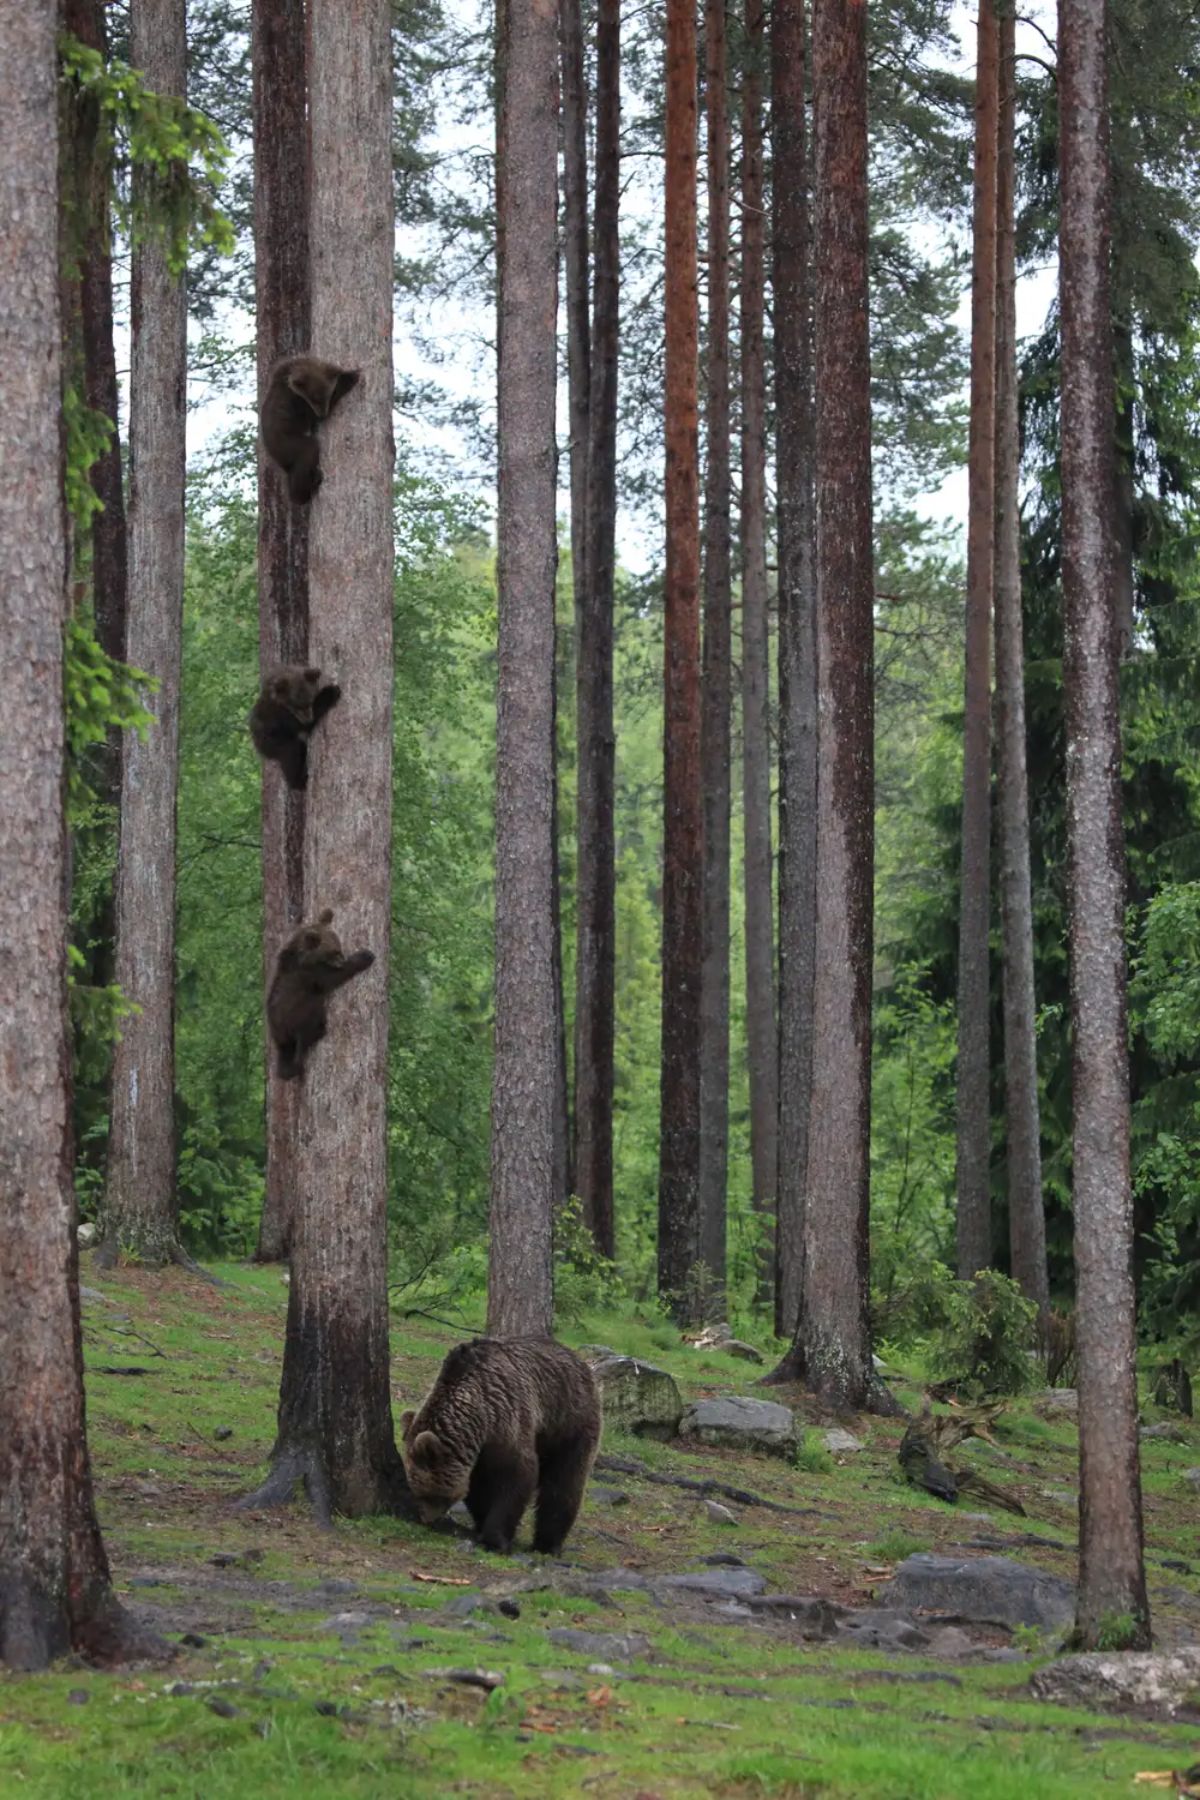 3 brown bears climbing a tall tree with the mother bear at the bottom of the tree